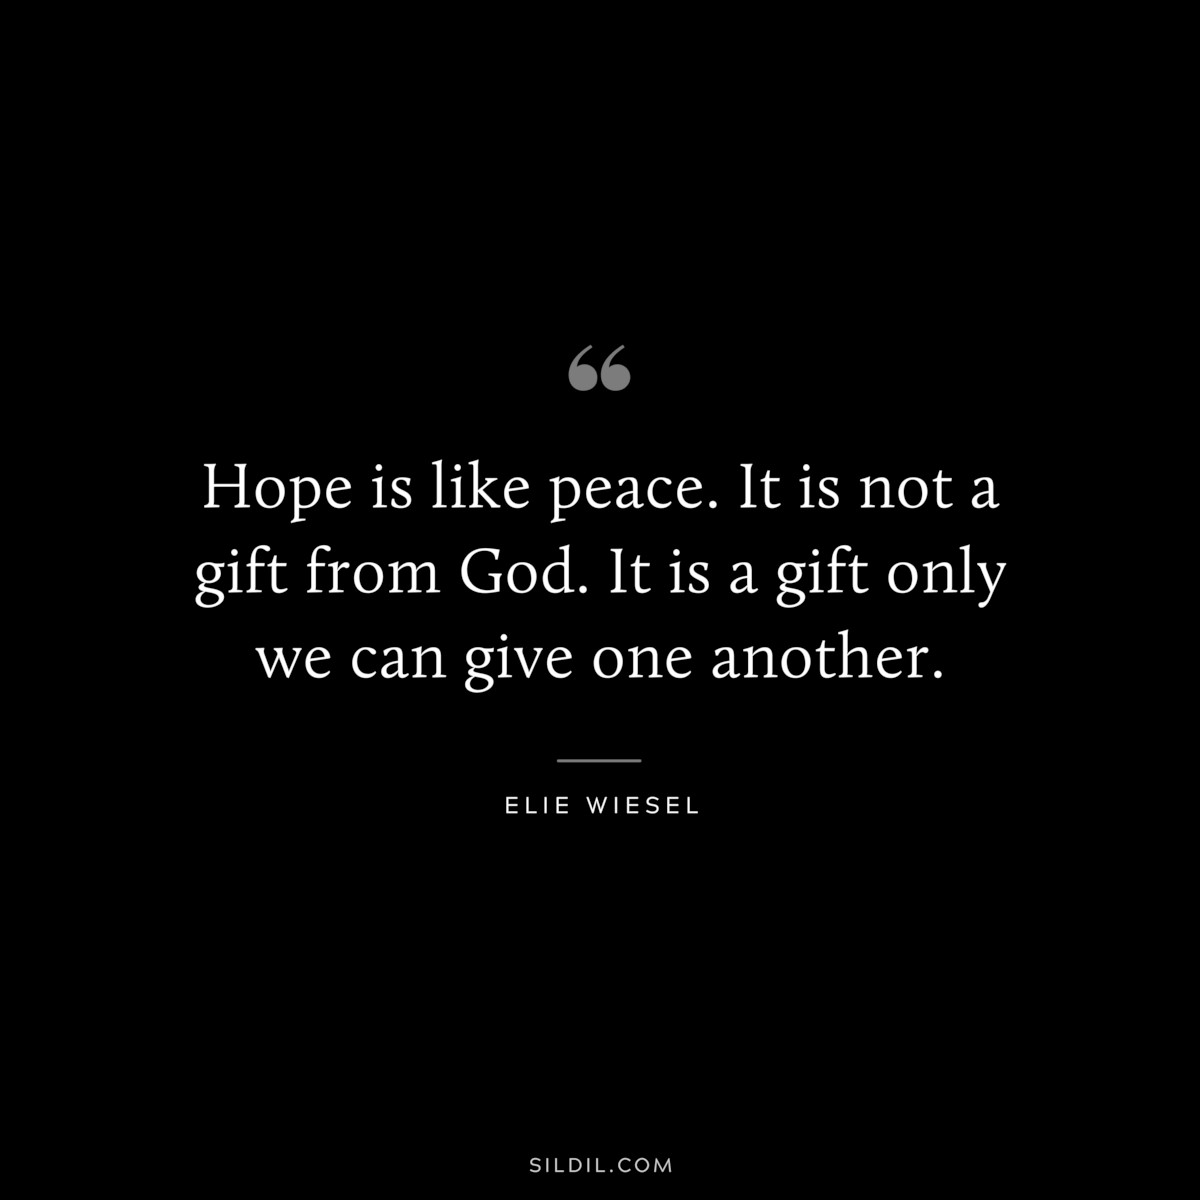 Hope is like peace. It is not a gift from God. It is a gift only we can give one another. ― Elie Wiesel